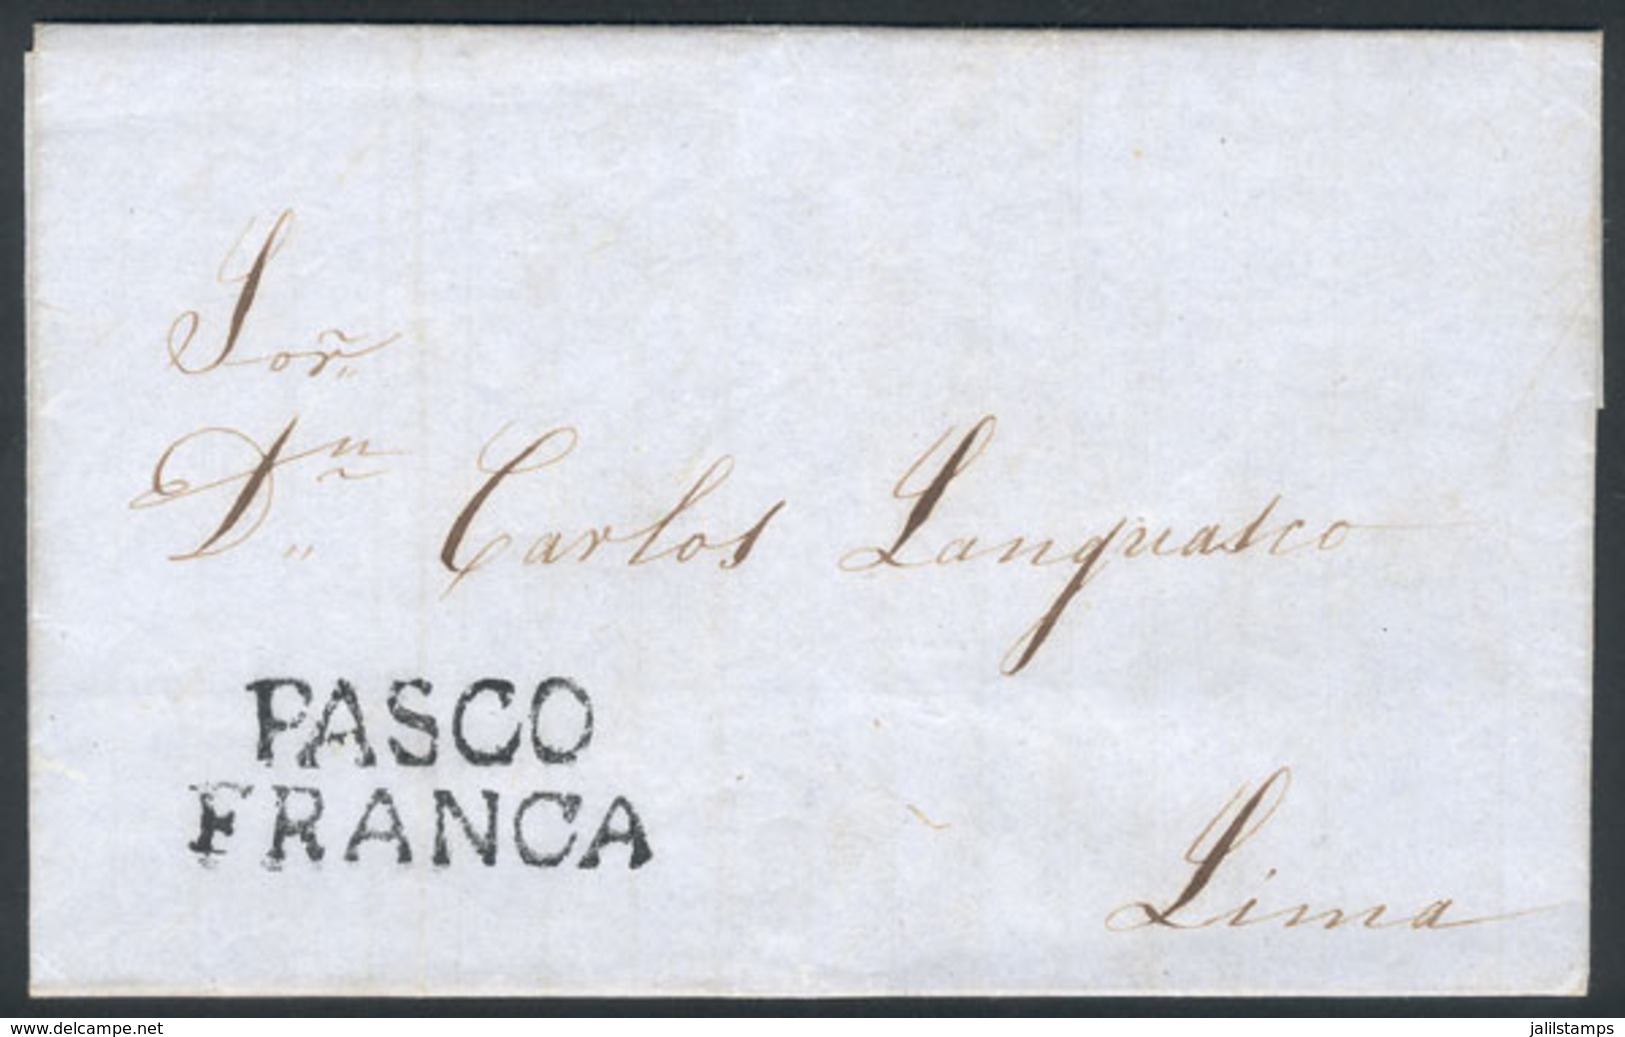 PERU: Entire Letter Dated 2/JUN/1851 To Lima, With Black PASCO And FRANCA Markings Perfectly Applied, Excellent Quality, - Pérou